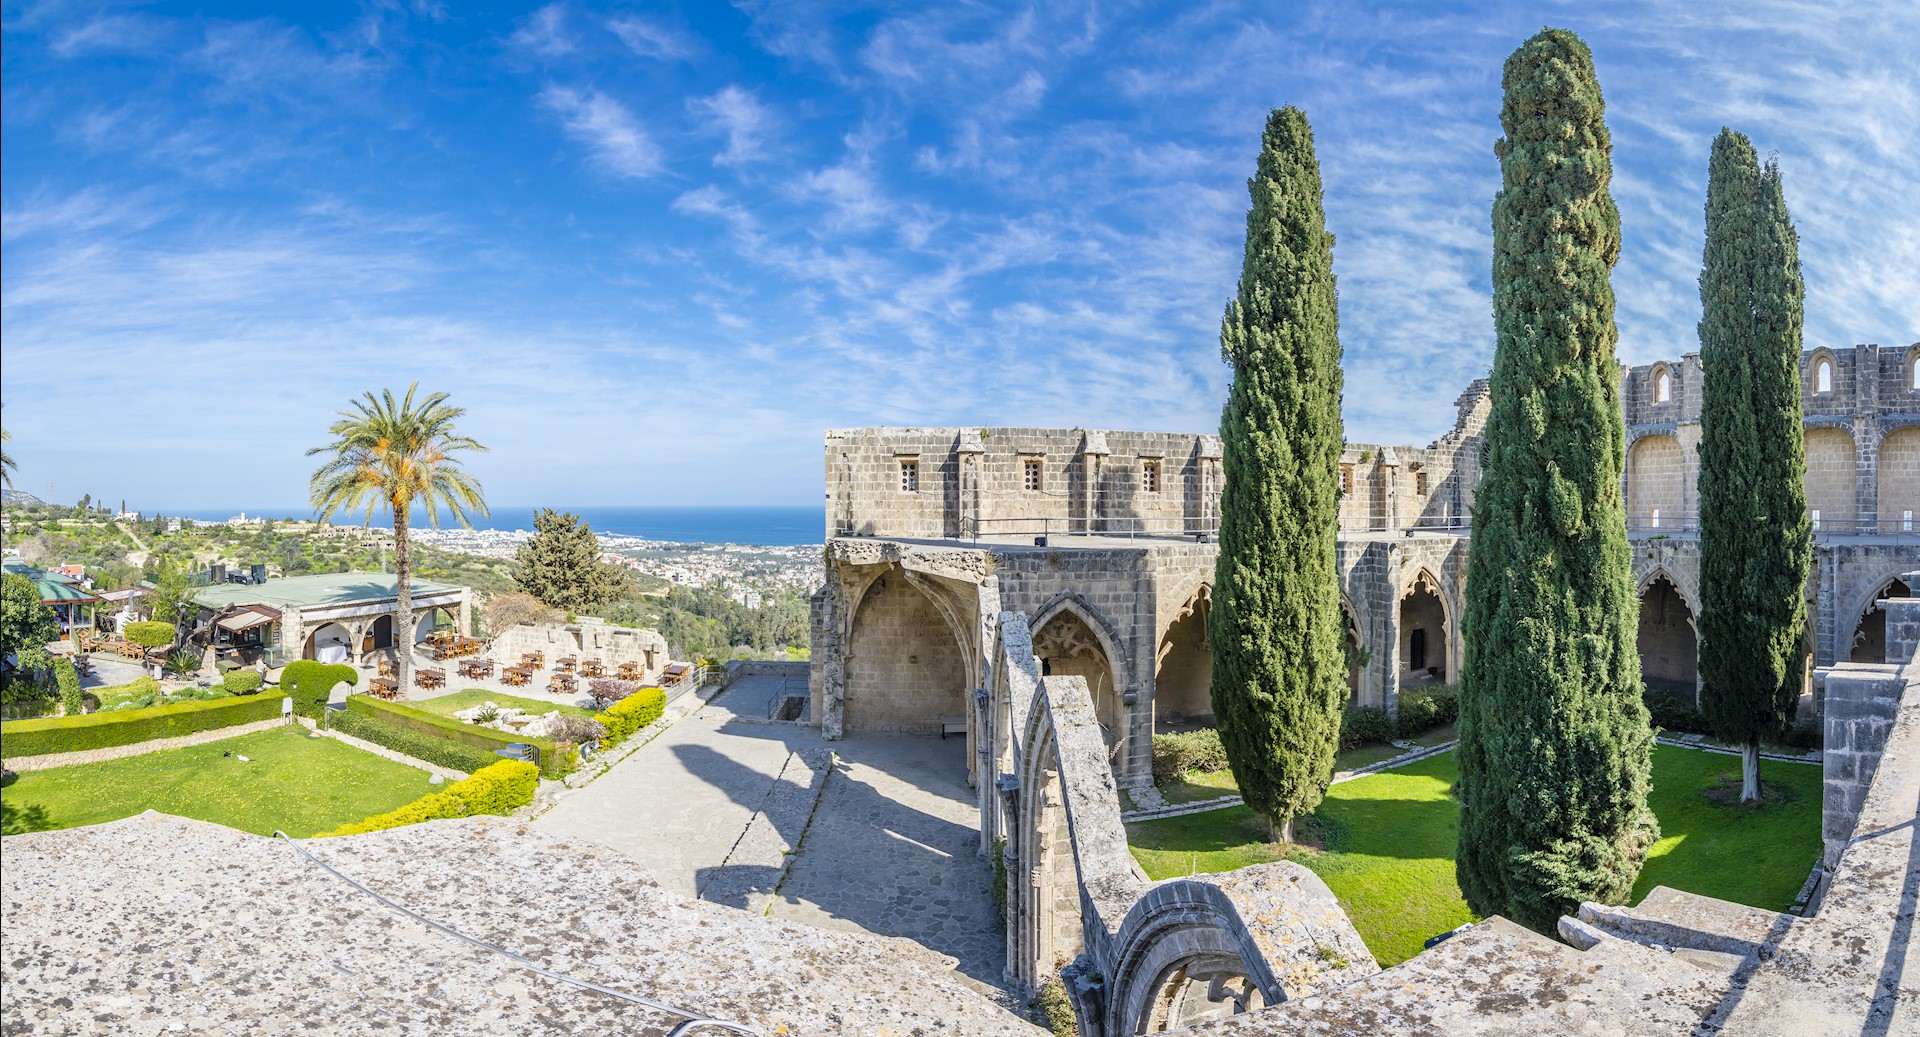 Bellapais Monastery can be found just outside of Girne